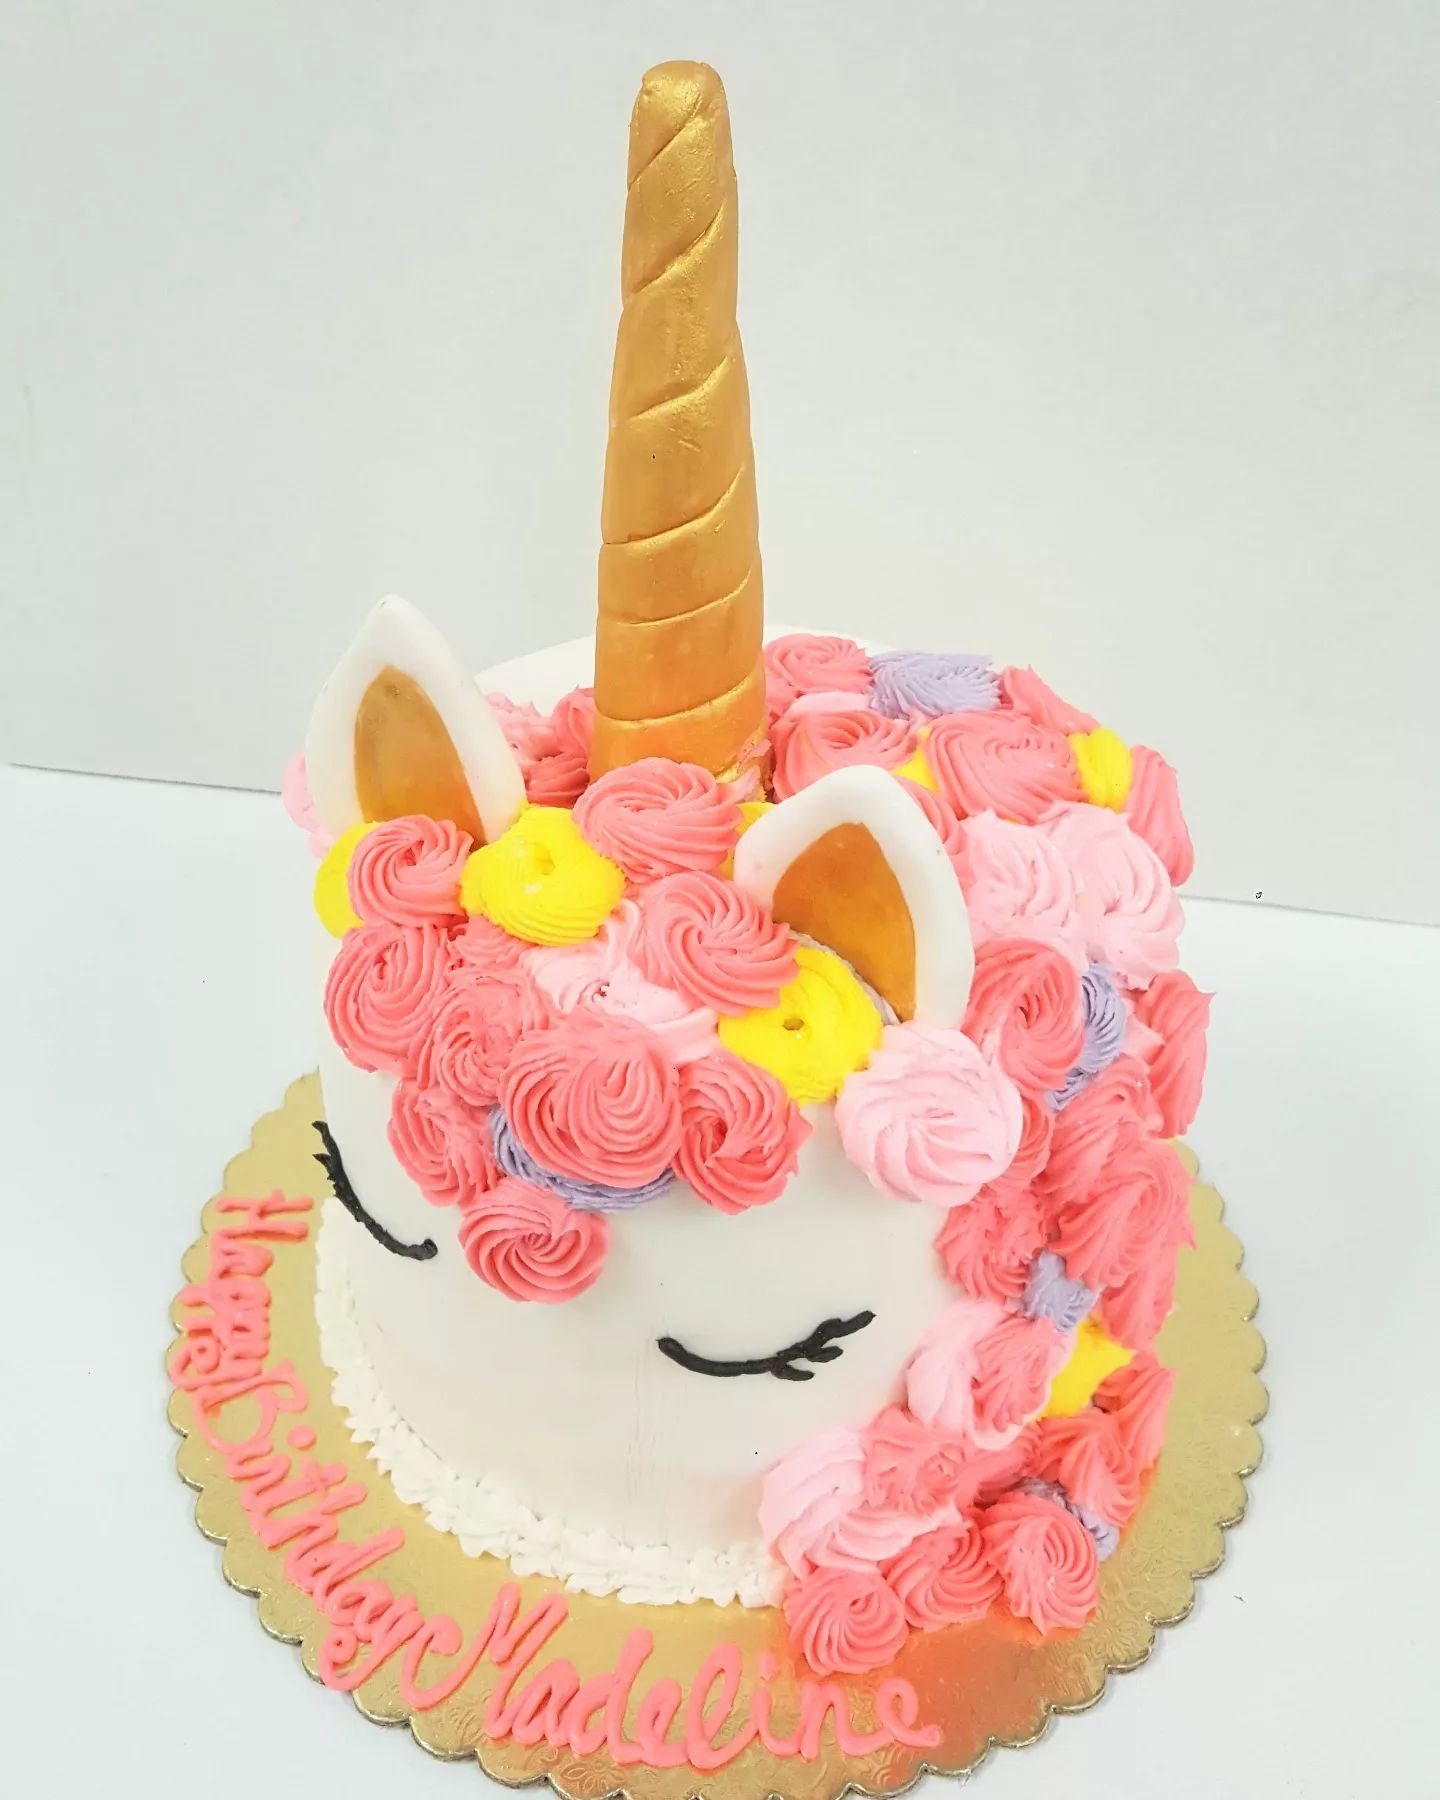 unicorn head cake with a gold horn and ears decorated with buttercream